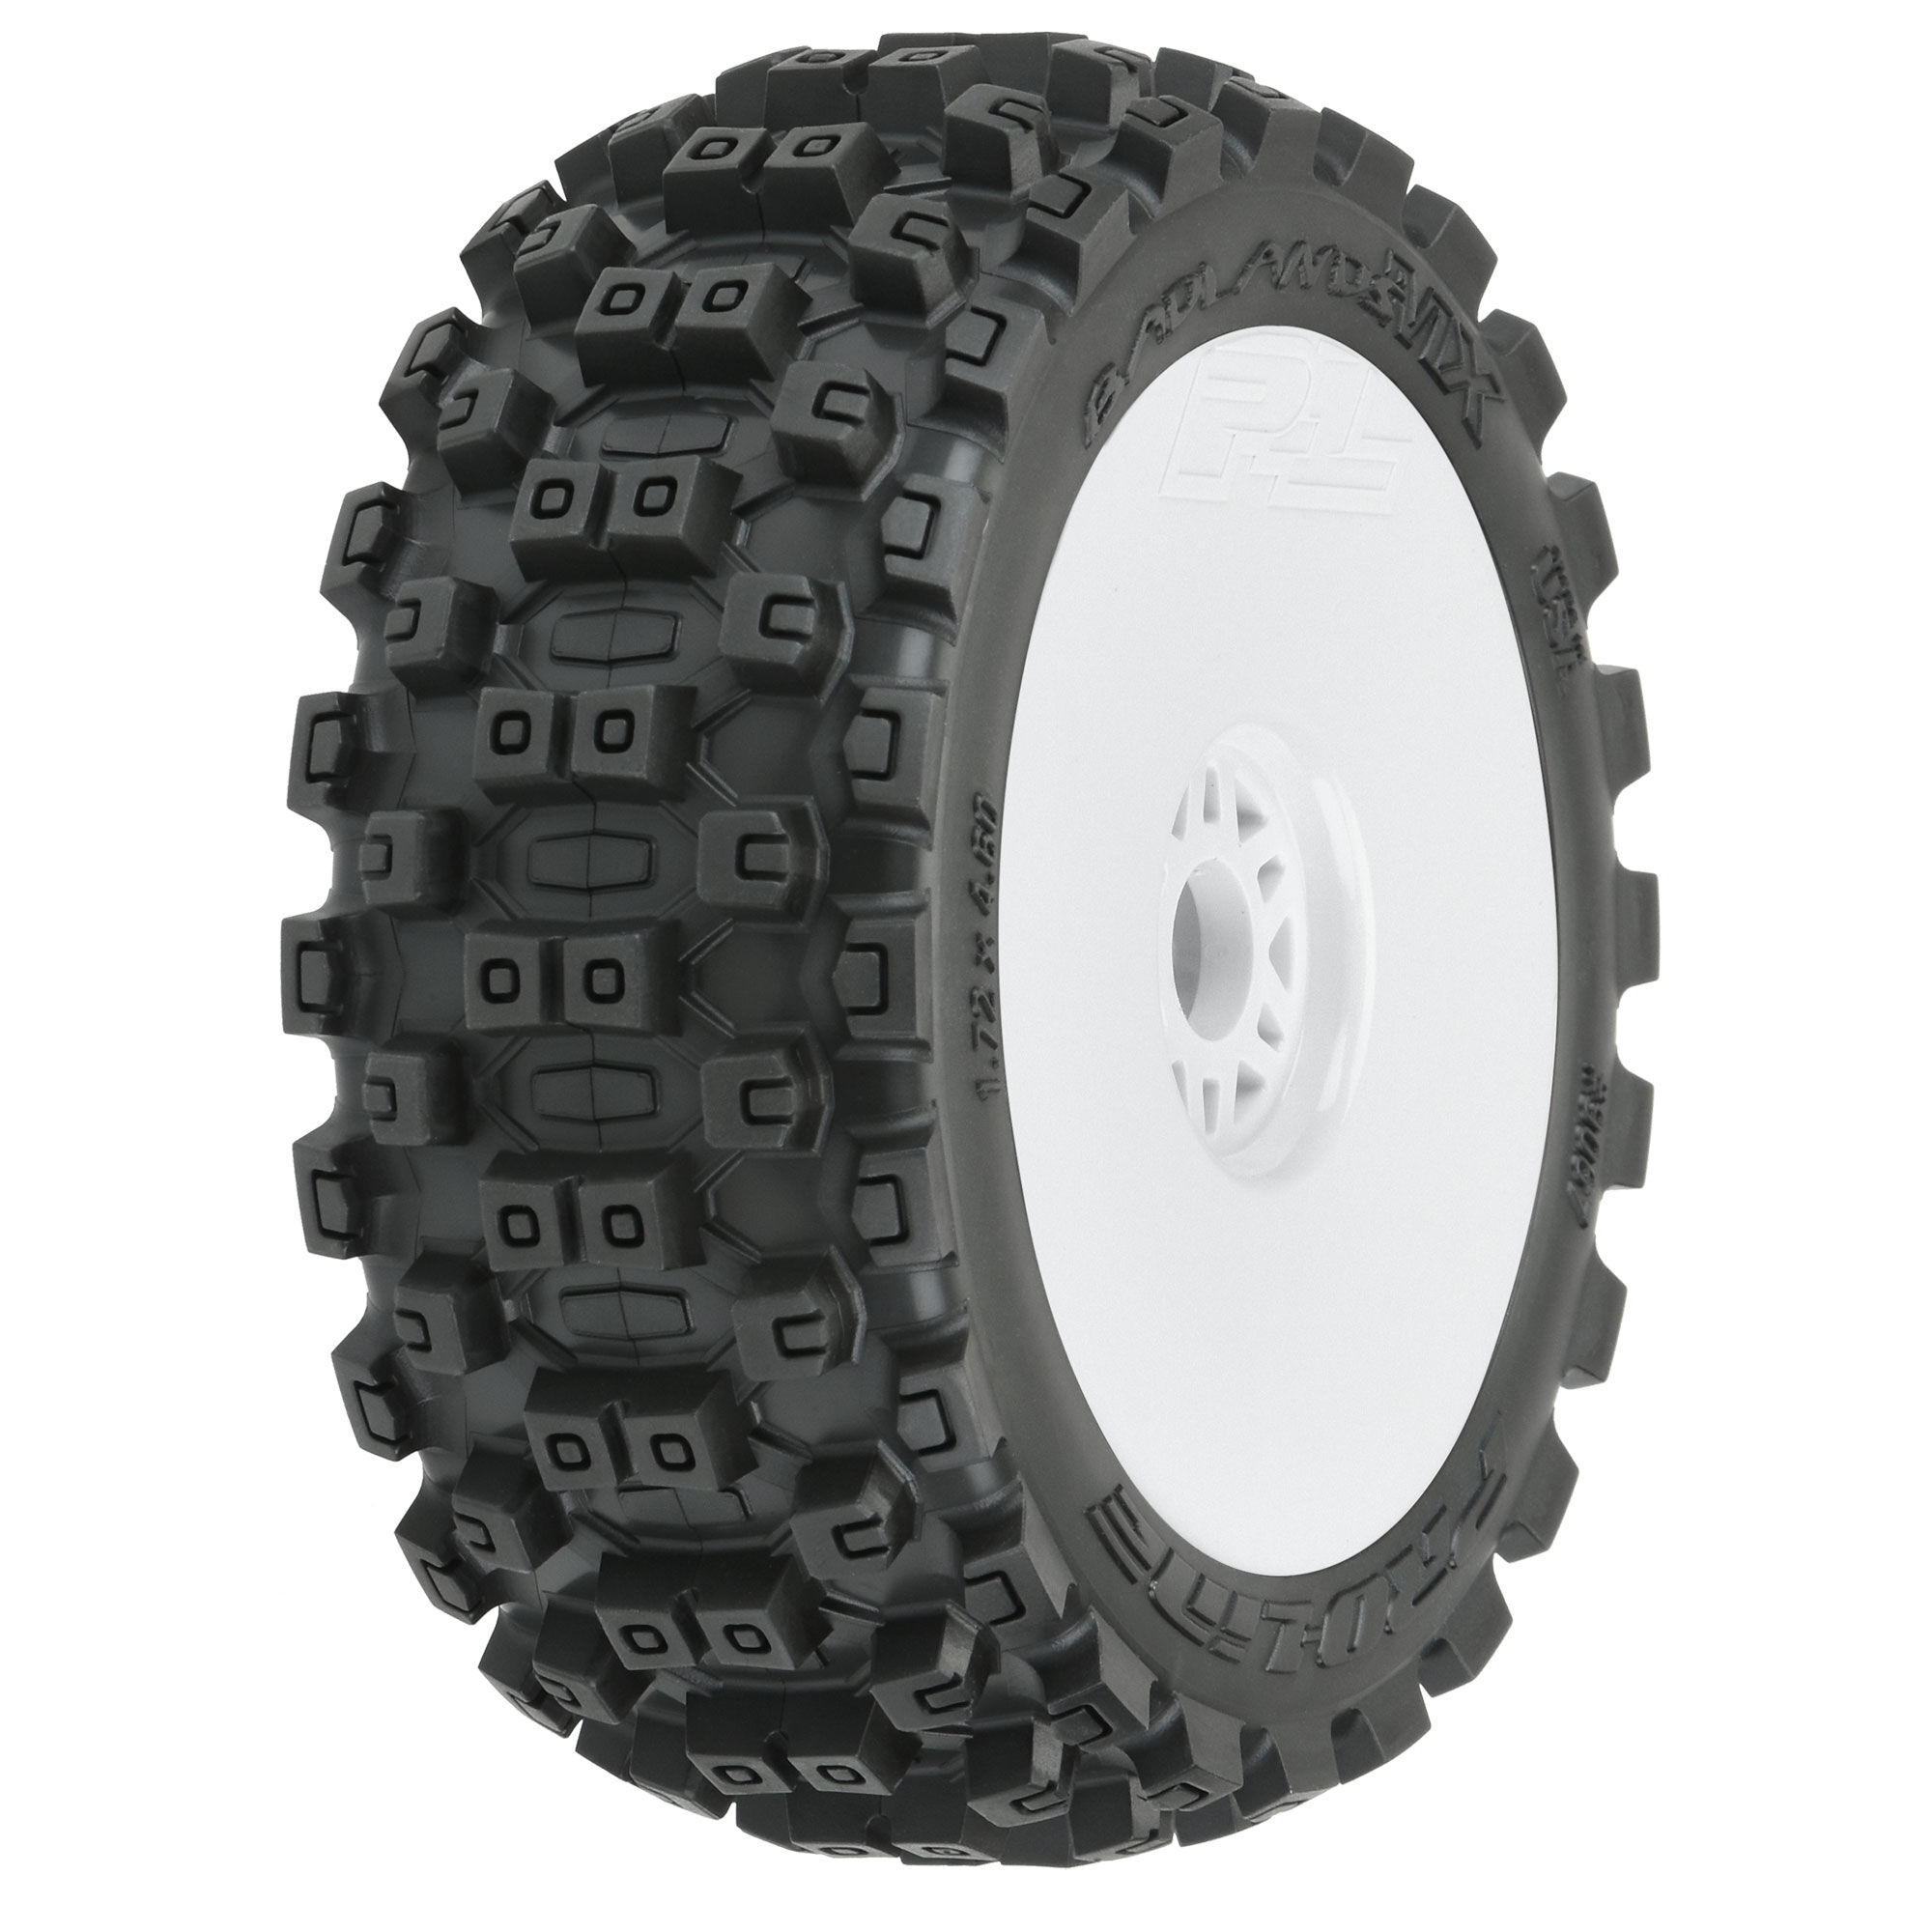 1/8 Badlands MX M2 Buggy Tires Mounted 17mm White